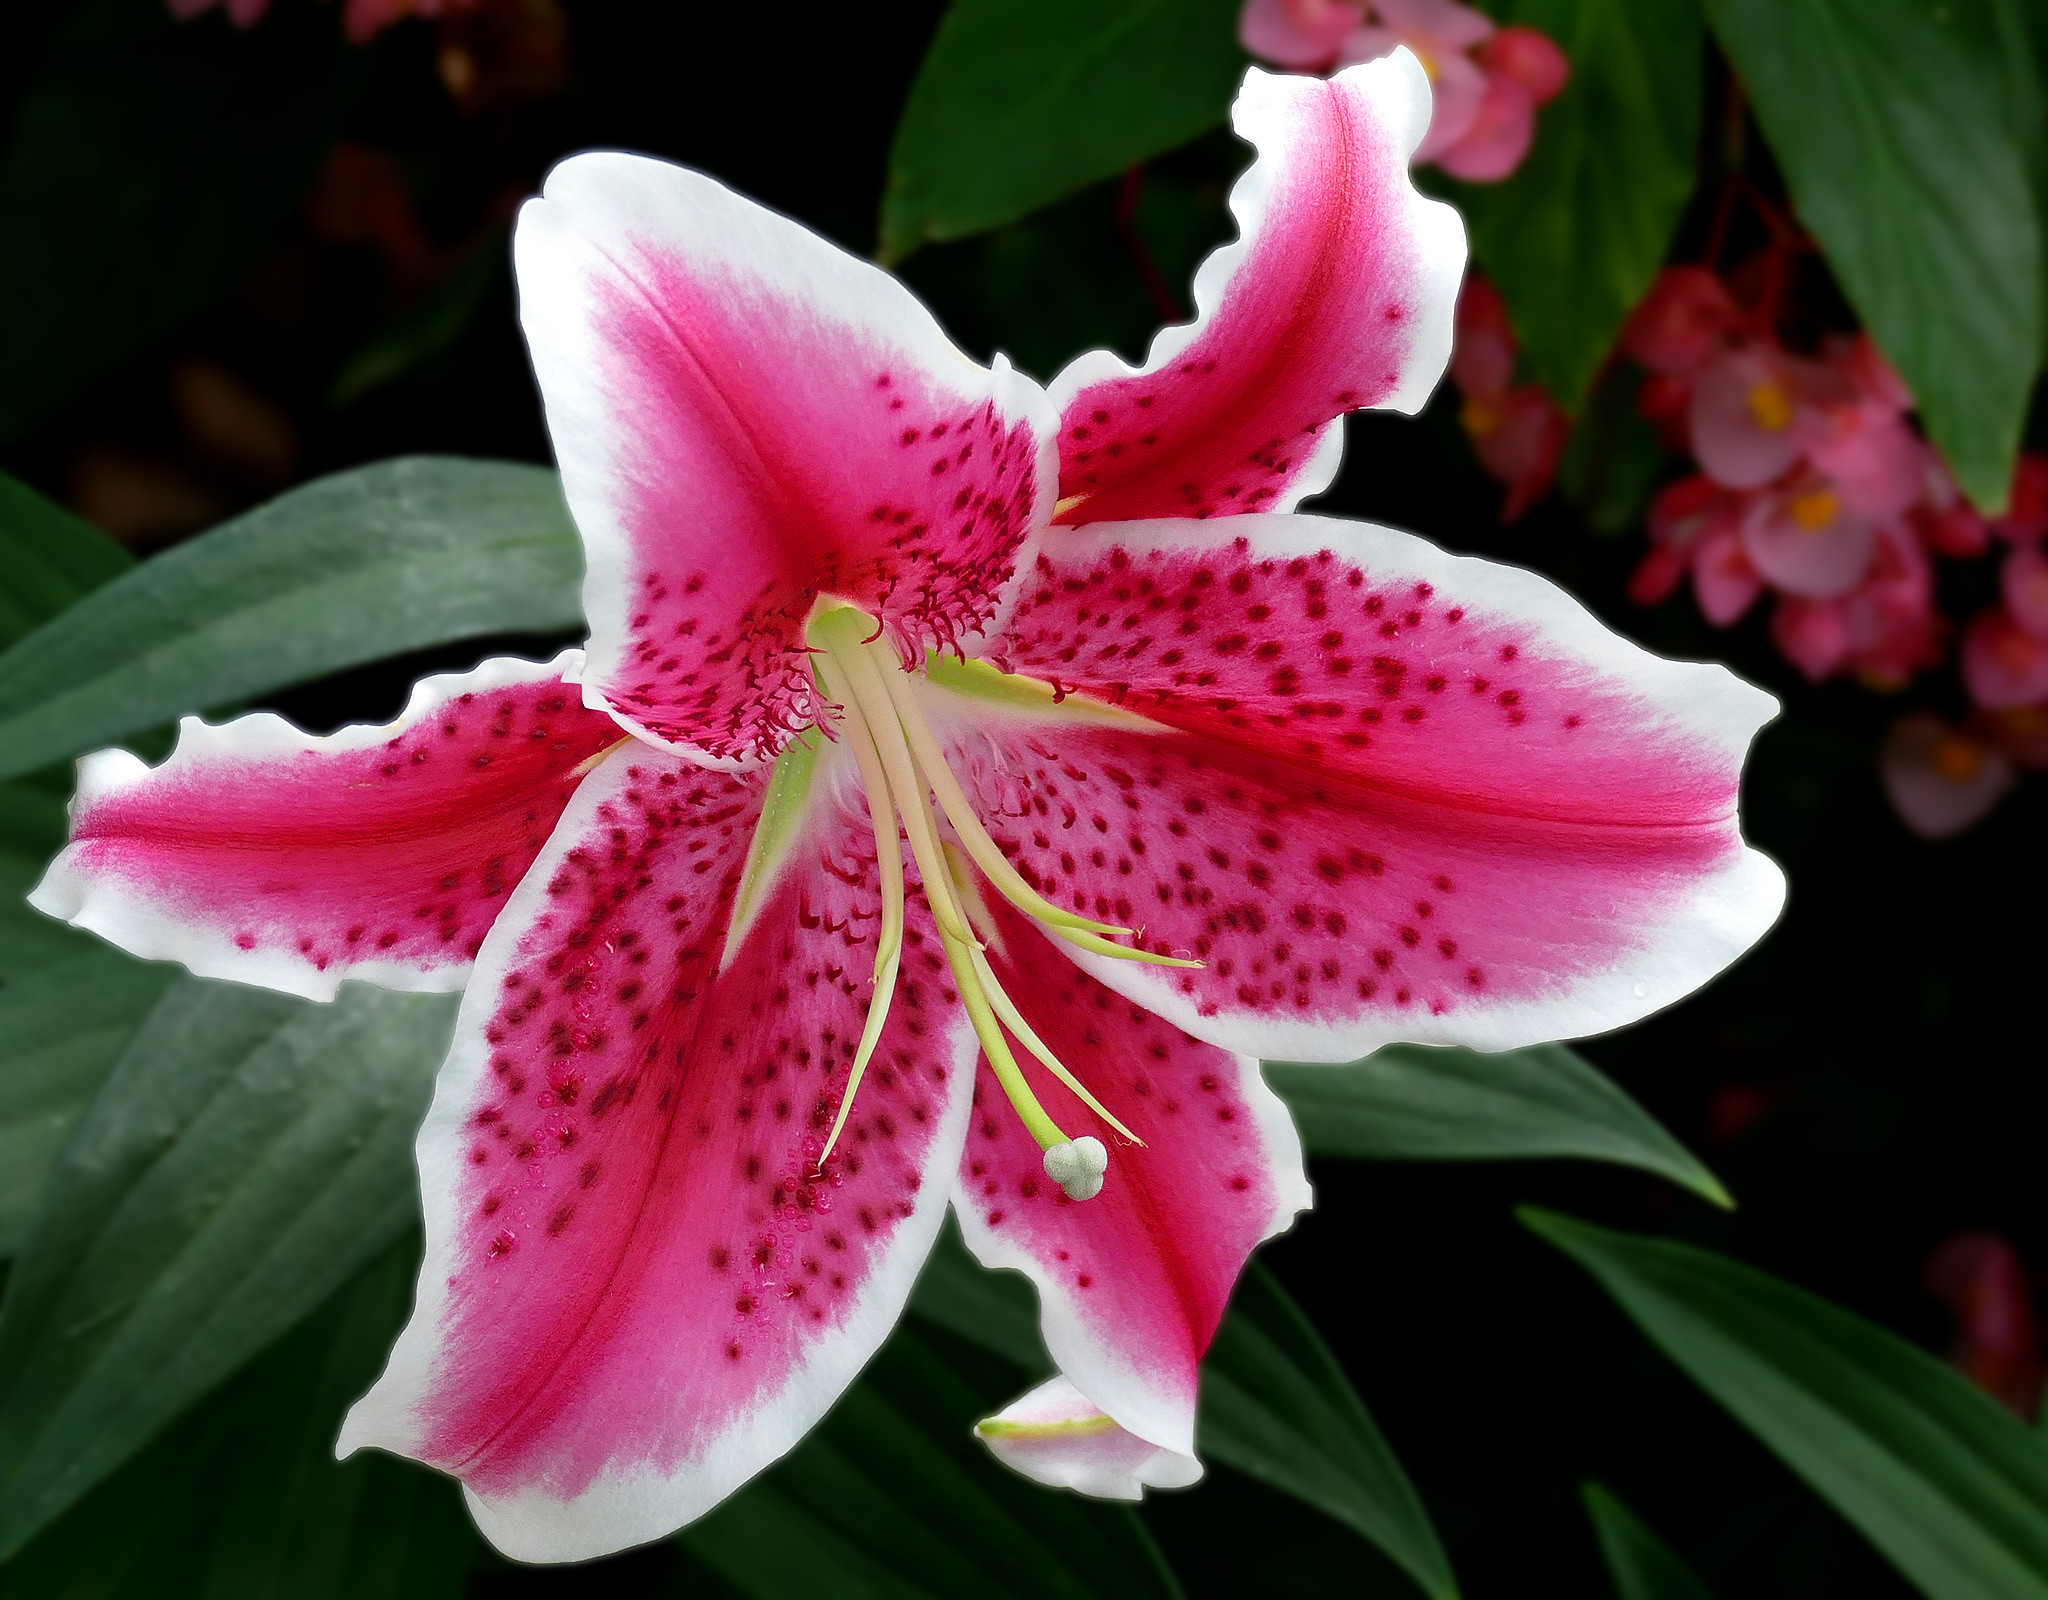 star gazer lily picture